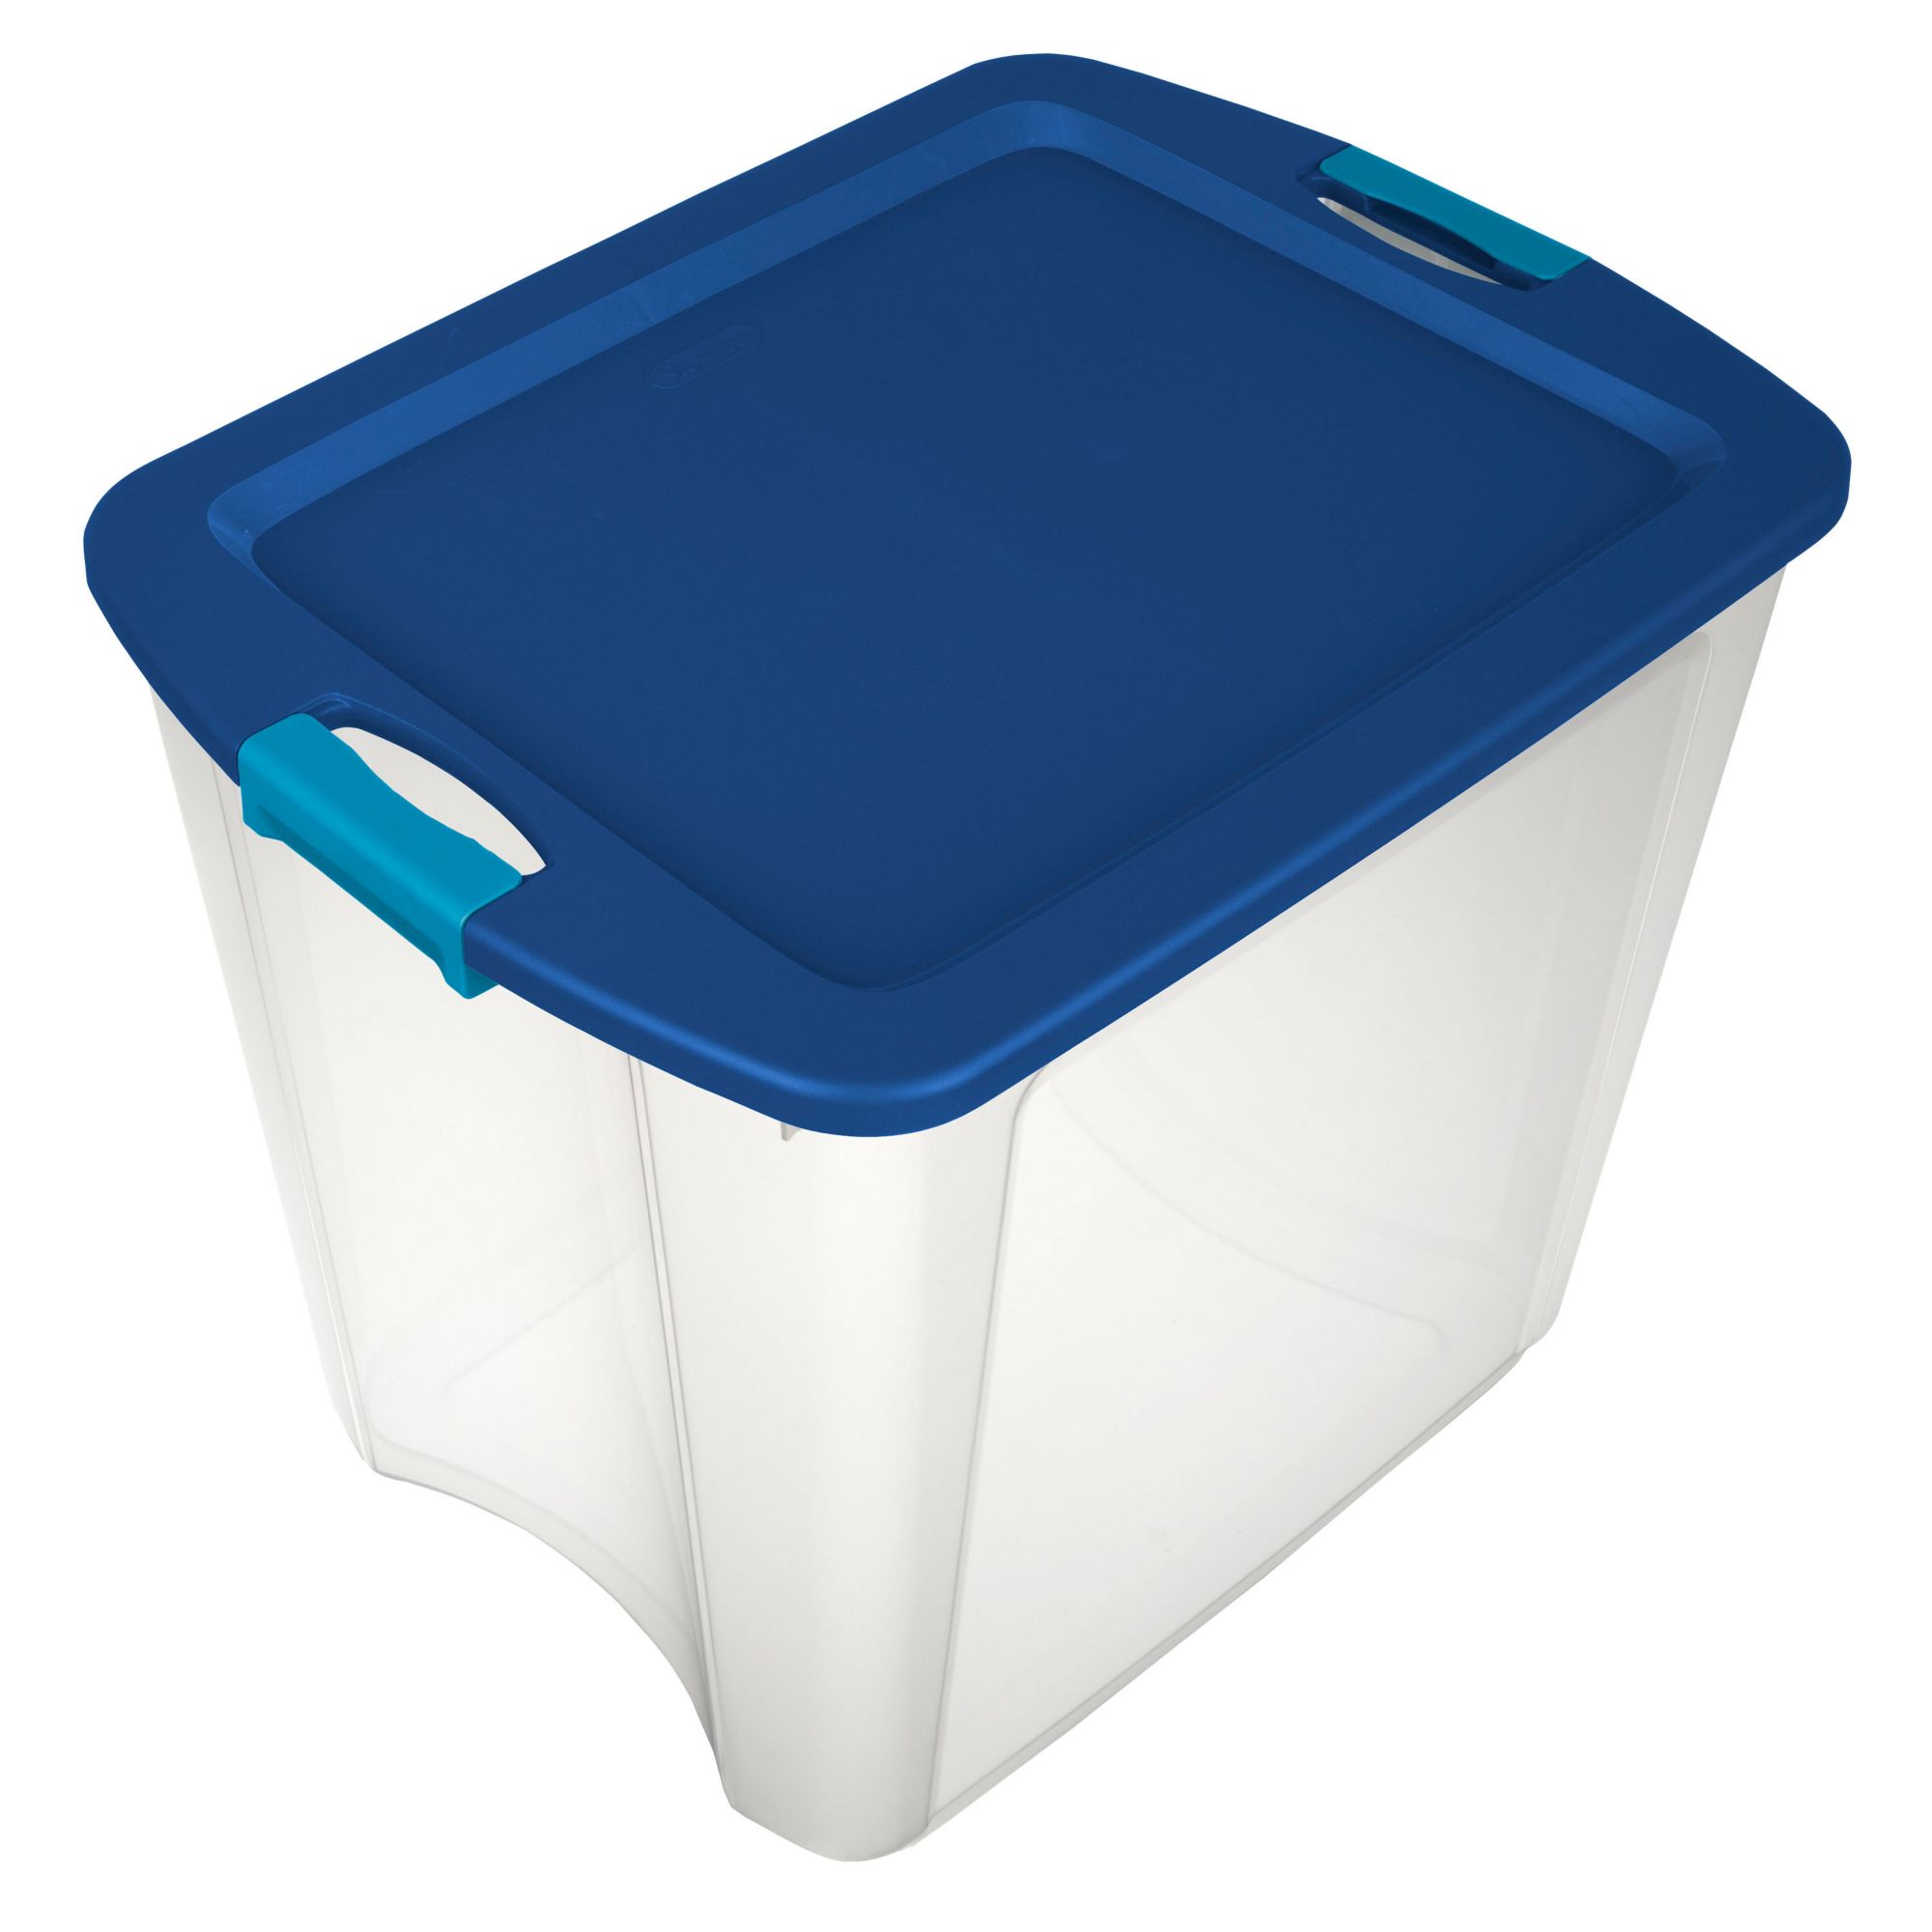 Storage Totes & Containers